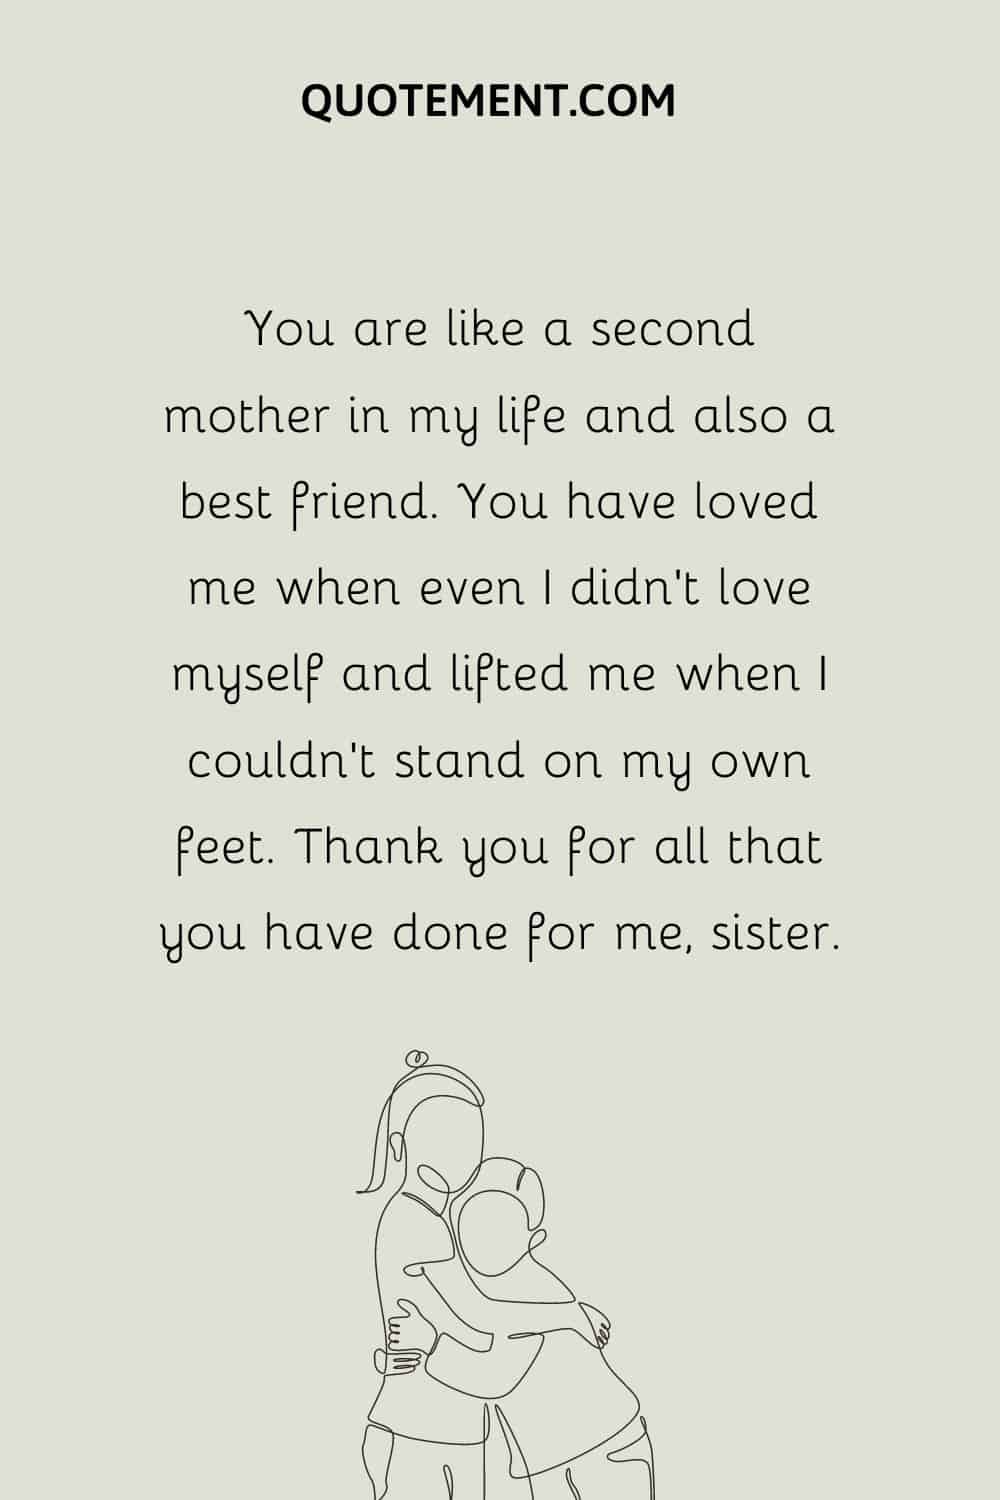 You are like a second mother in my life and also a best friend. You have loved me when even I didn’t love myself and lifted me when I couldn’t stand on my own feet.